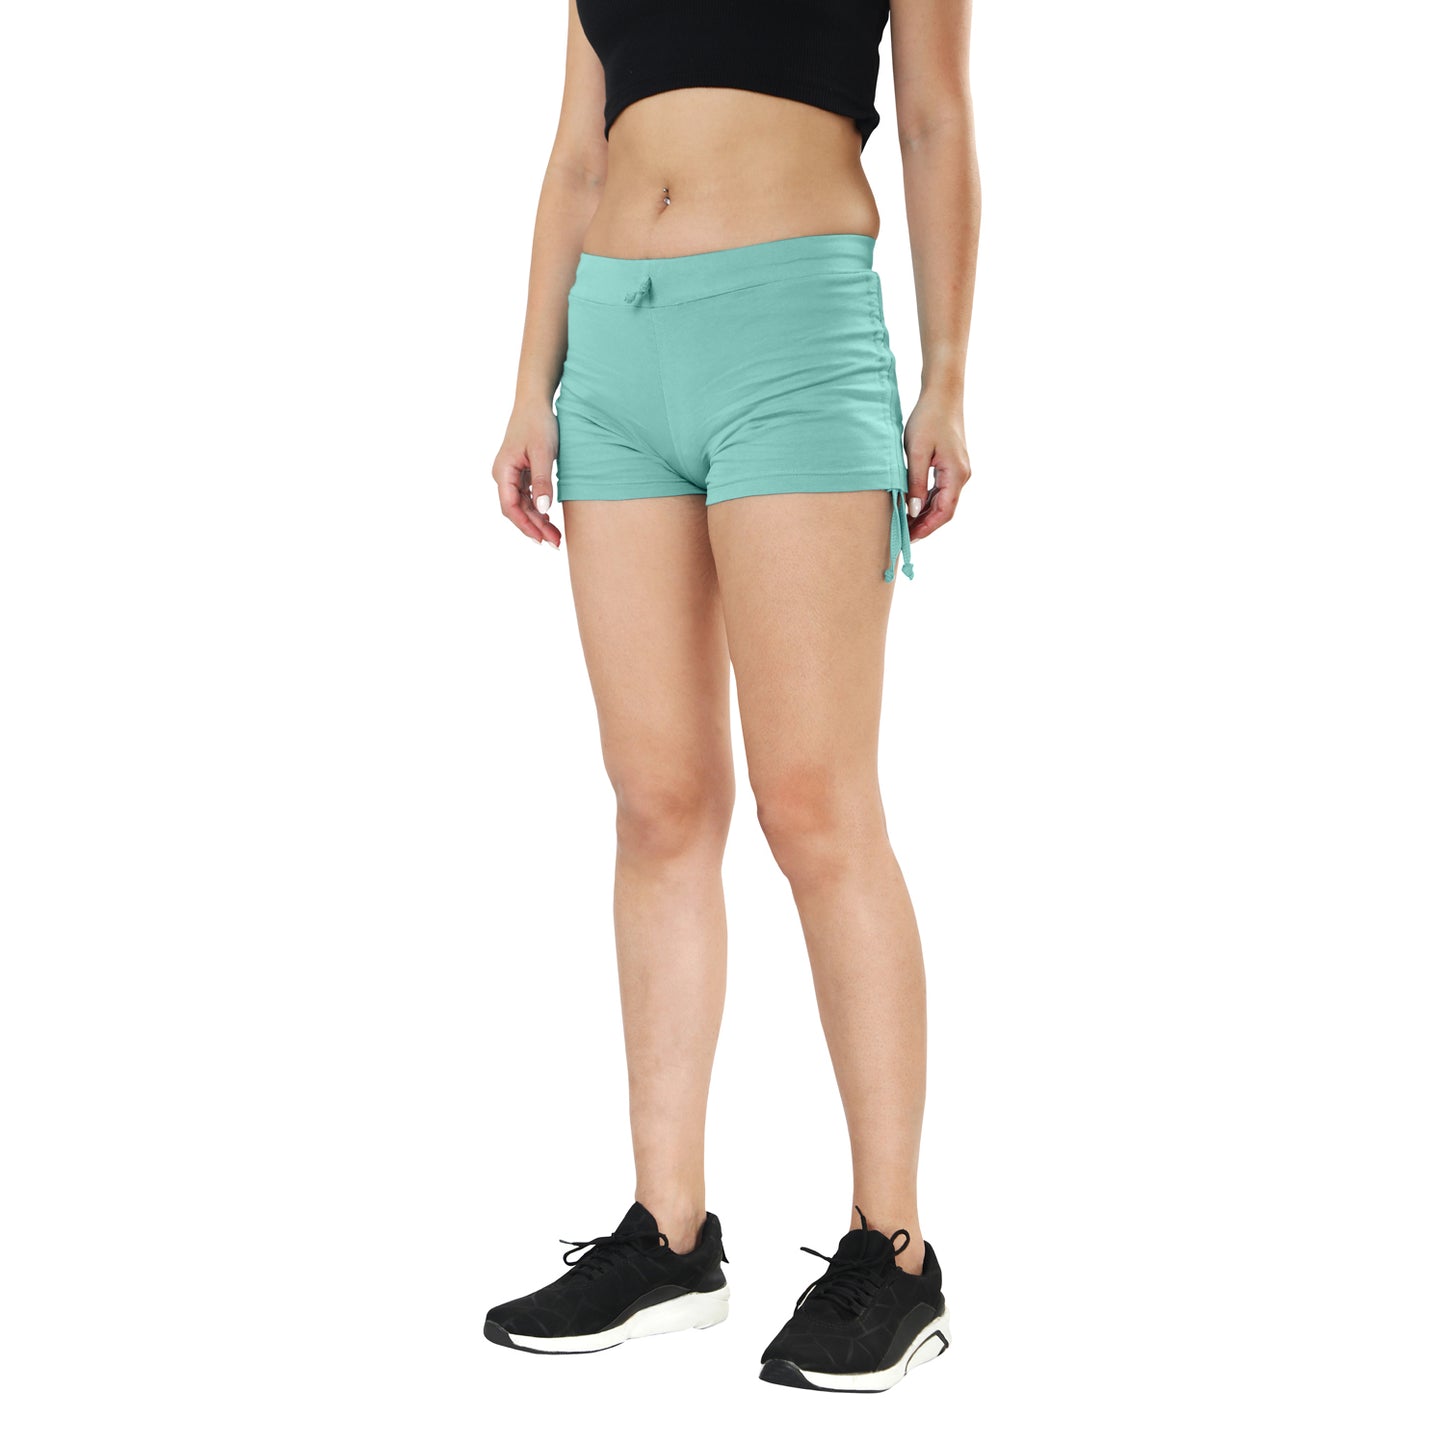 TWGE Women Cotton Hot Shorts - Short Pants for Ladies - Ideal for Gym Yoga & Nightwear - Color Teal Blue